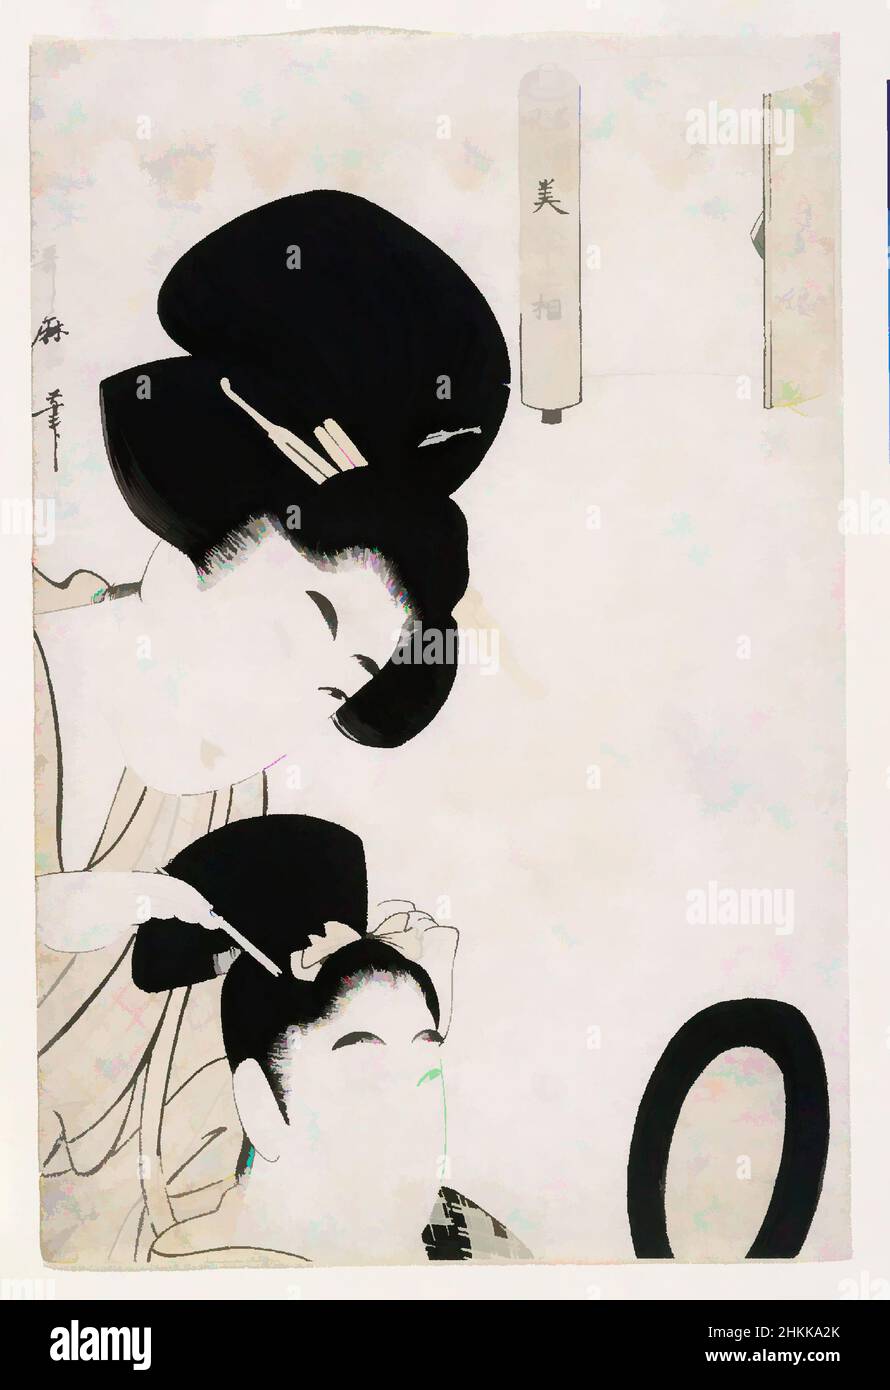 Art inspired by Beauty Fixing Hair, from the series Scenery of Famous Places and Twelve Physiognomies of Beauties, Kitagawa Utamaro, Japanese, 1753-1806, Color woodblock print on paper, Japan, ca. 1803, Edo Period, 14 15/16 x 9 15/16 in., 38.0 x 25.2 cm, geisha, girls, haircut, japanese, Classic works modernized by Artotop with a splash of modernity. Shapes, color and value, eye-catching visual impact on art. Emotions through freedom of artworks in a contemporary way. A timeless message pursuing a wildly creative new direction. Artists turning to the digital medium and creating the Artotop NFT Stock Photo